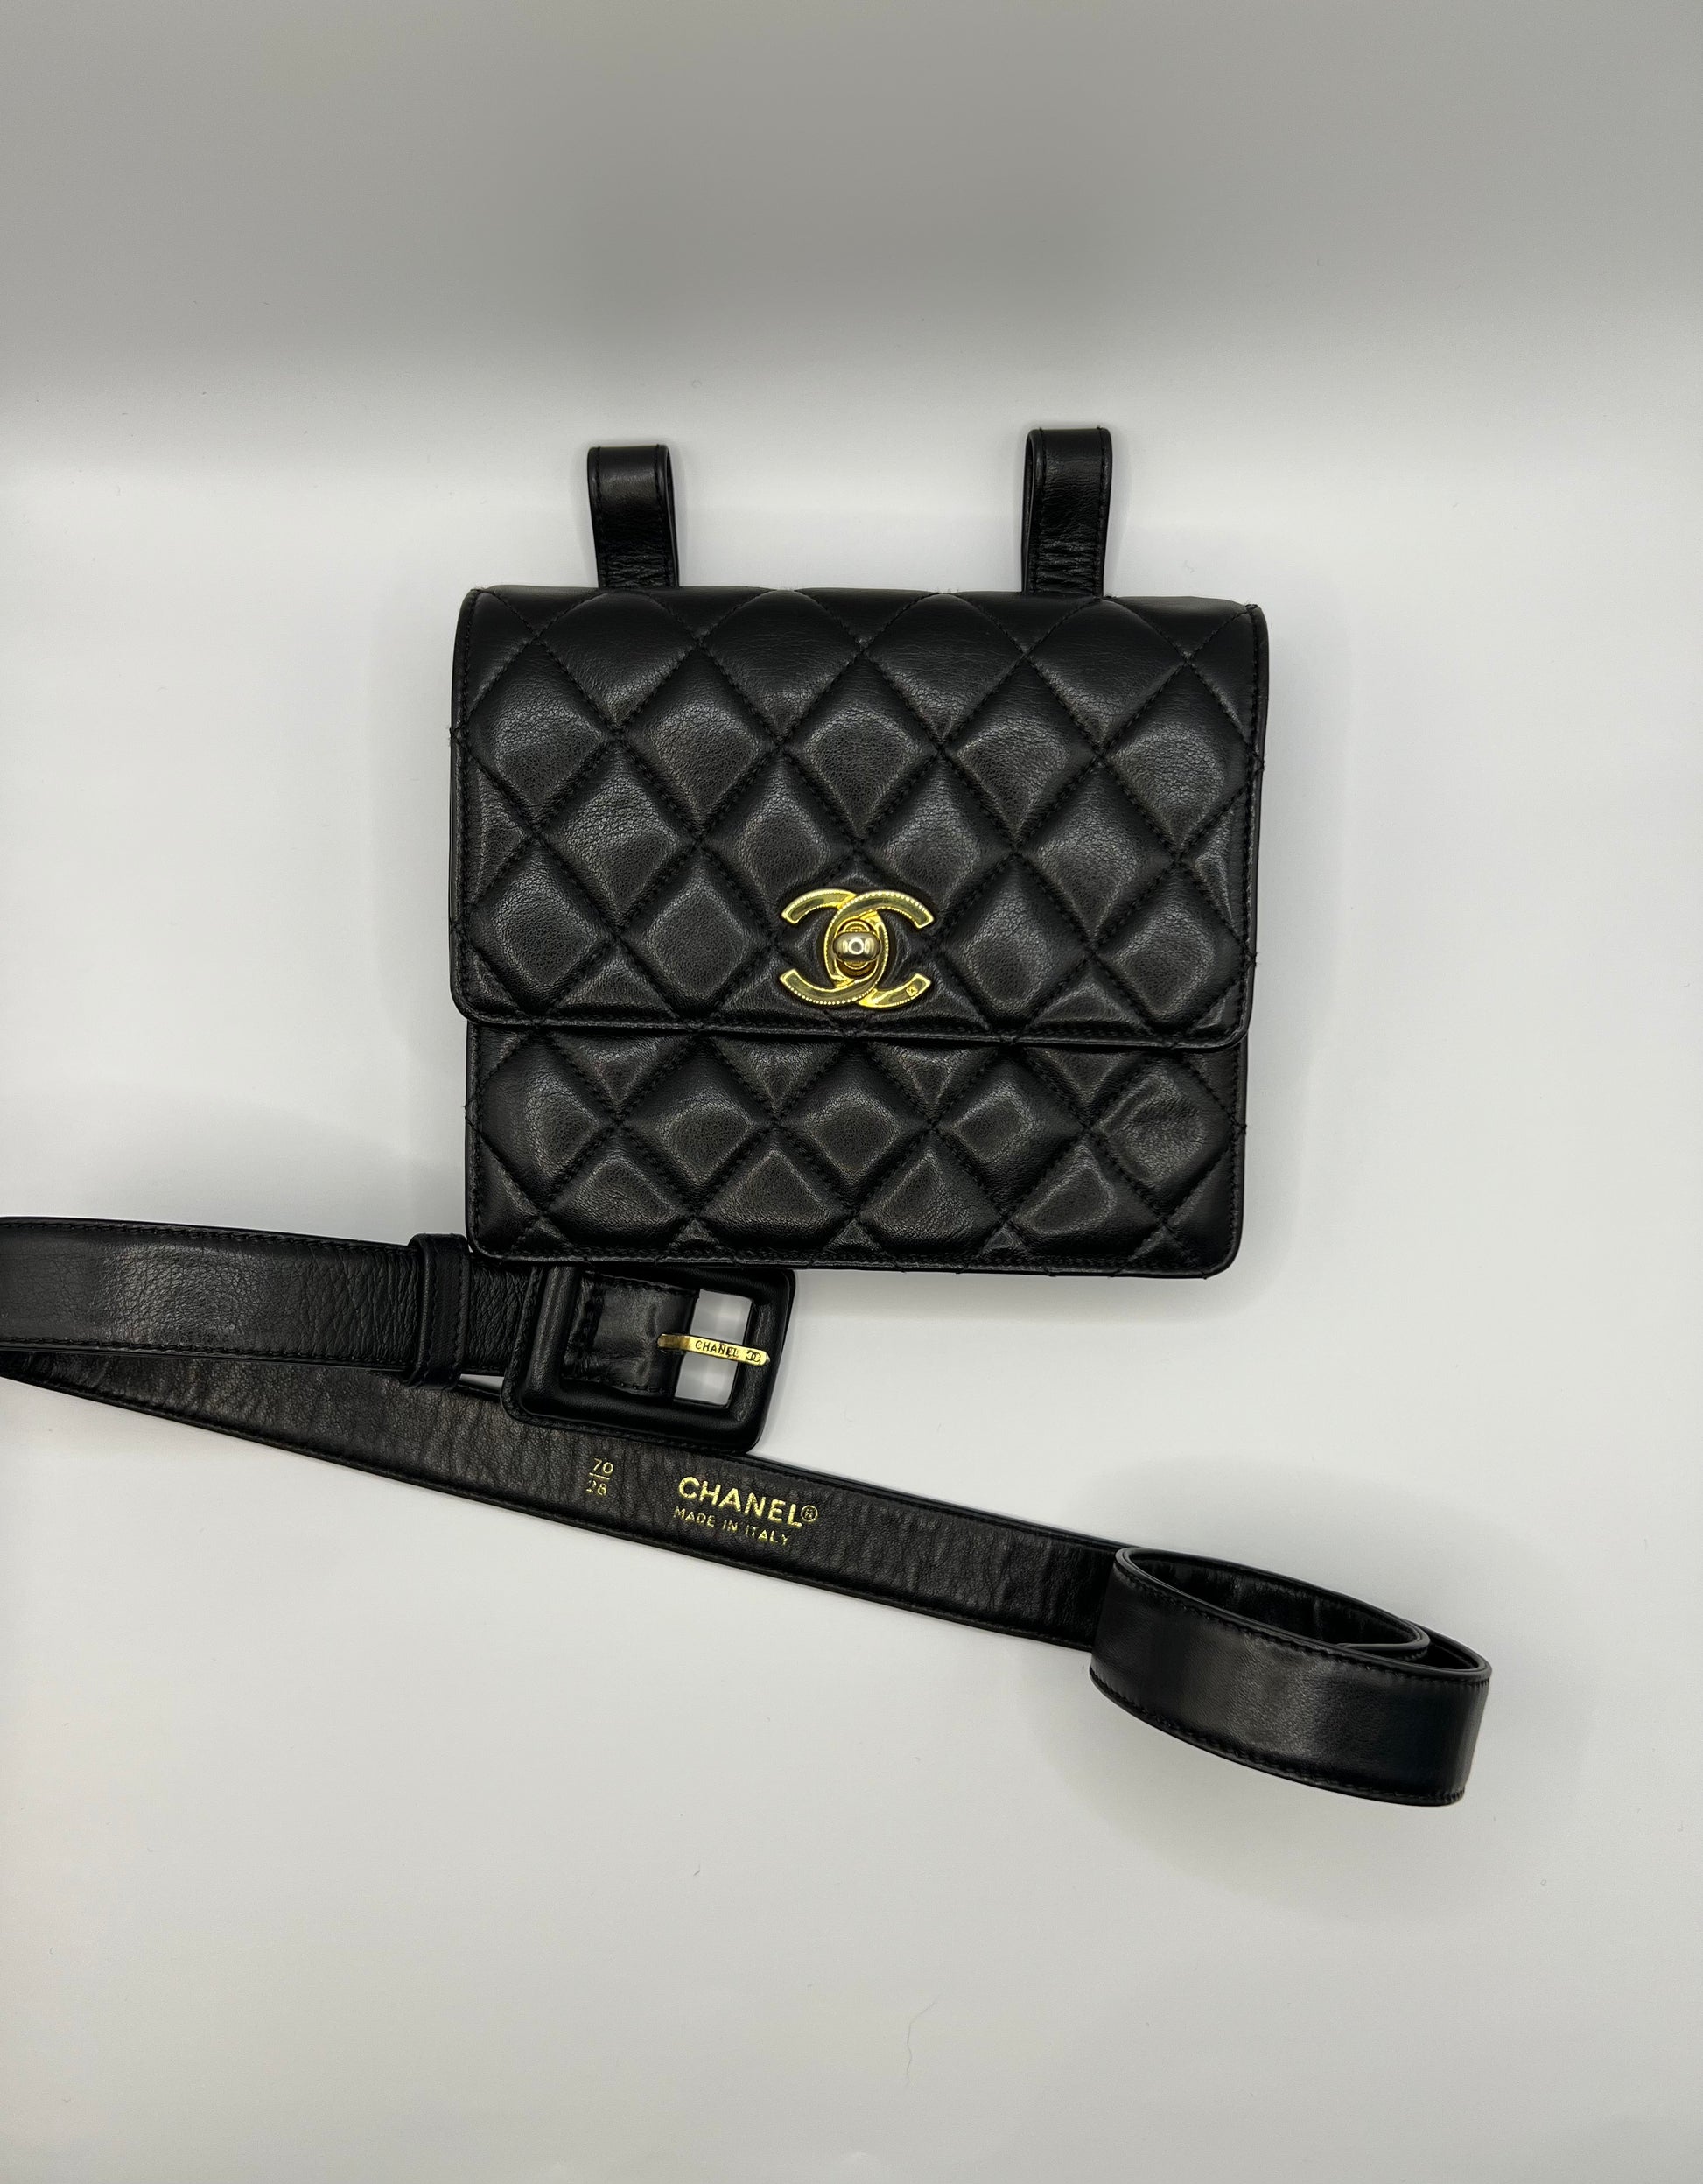 Chanel Quilted Leather Waist Bag - Black Waist Bags, Handbags